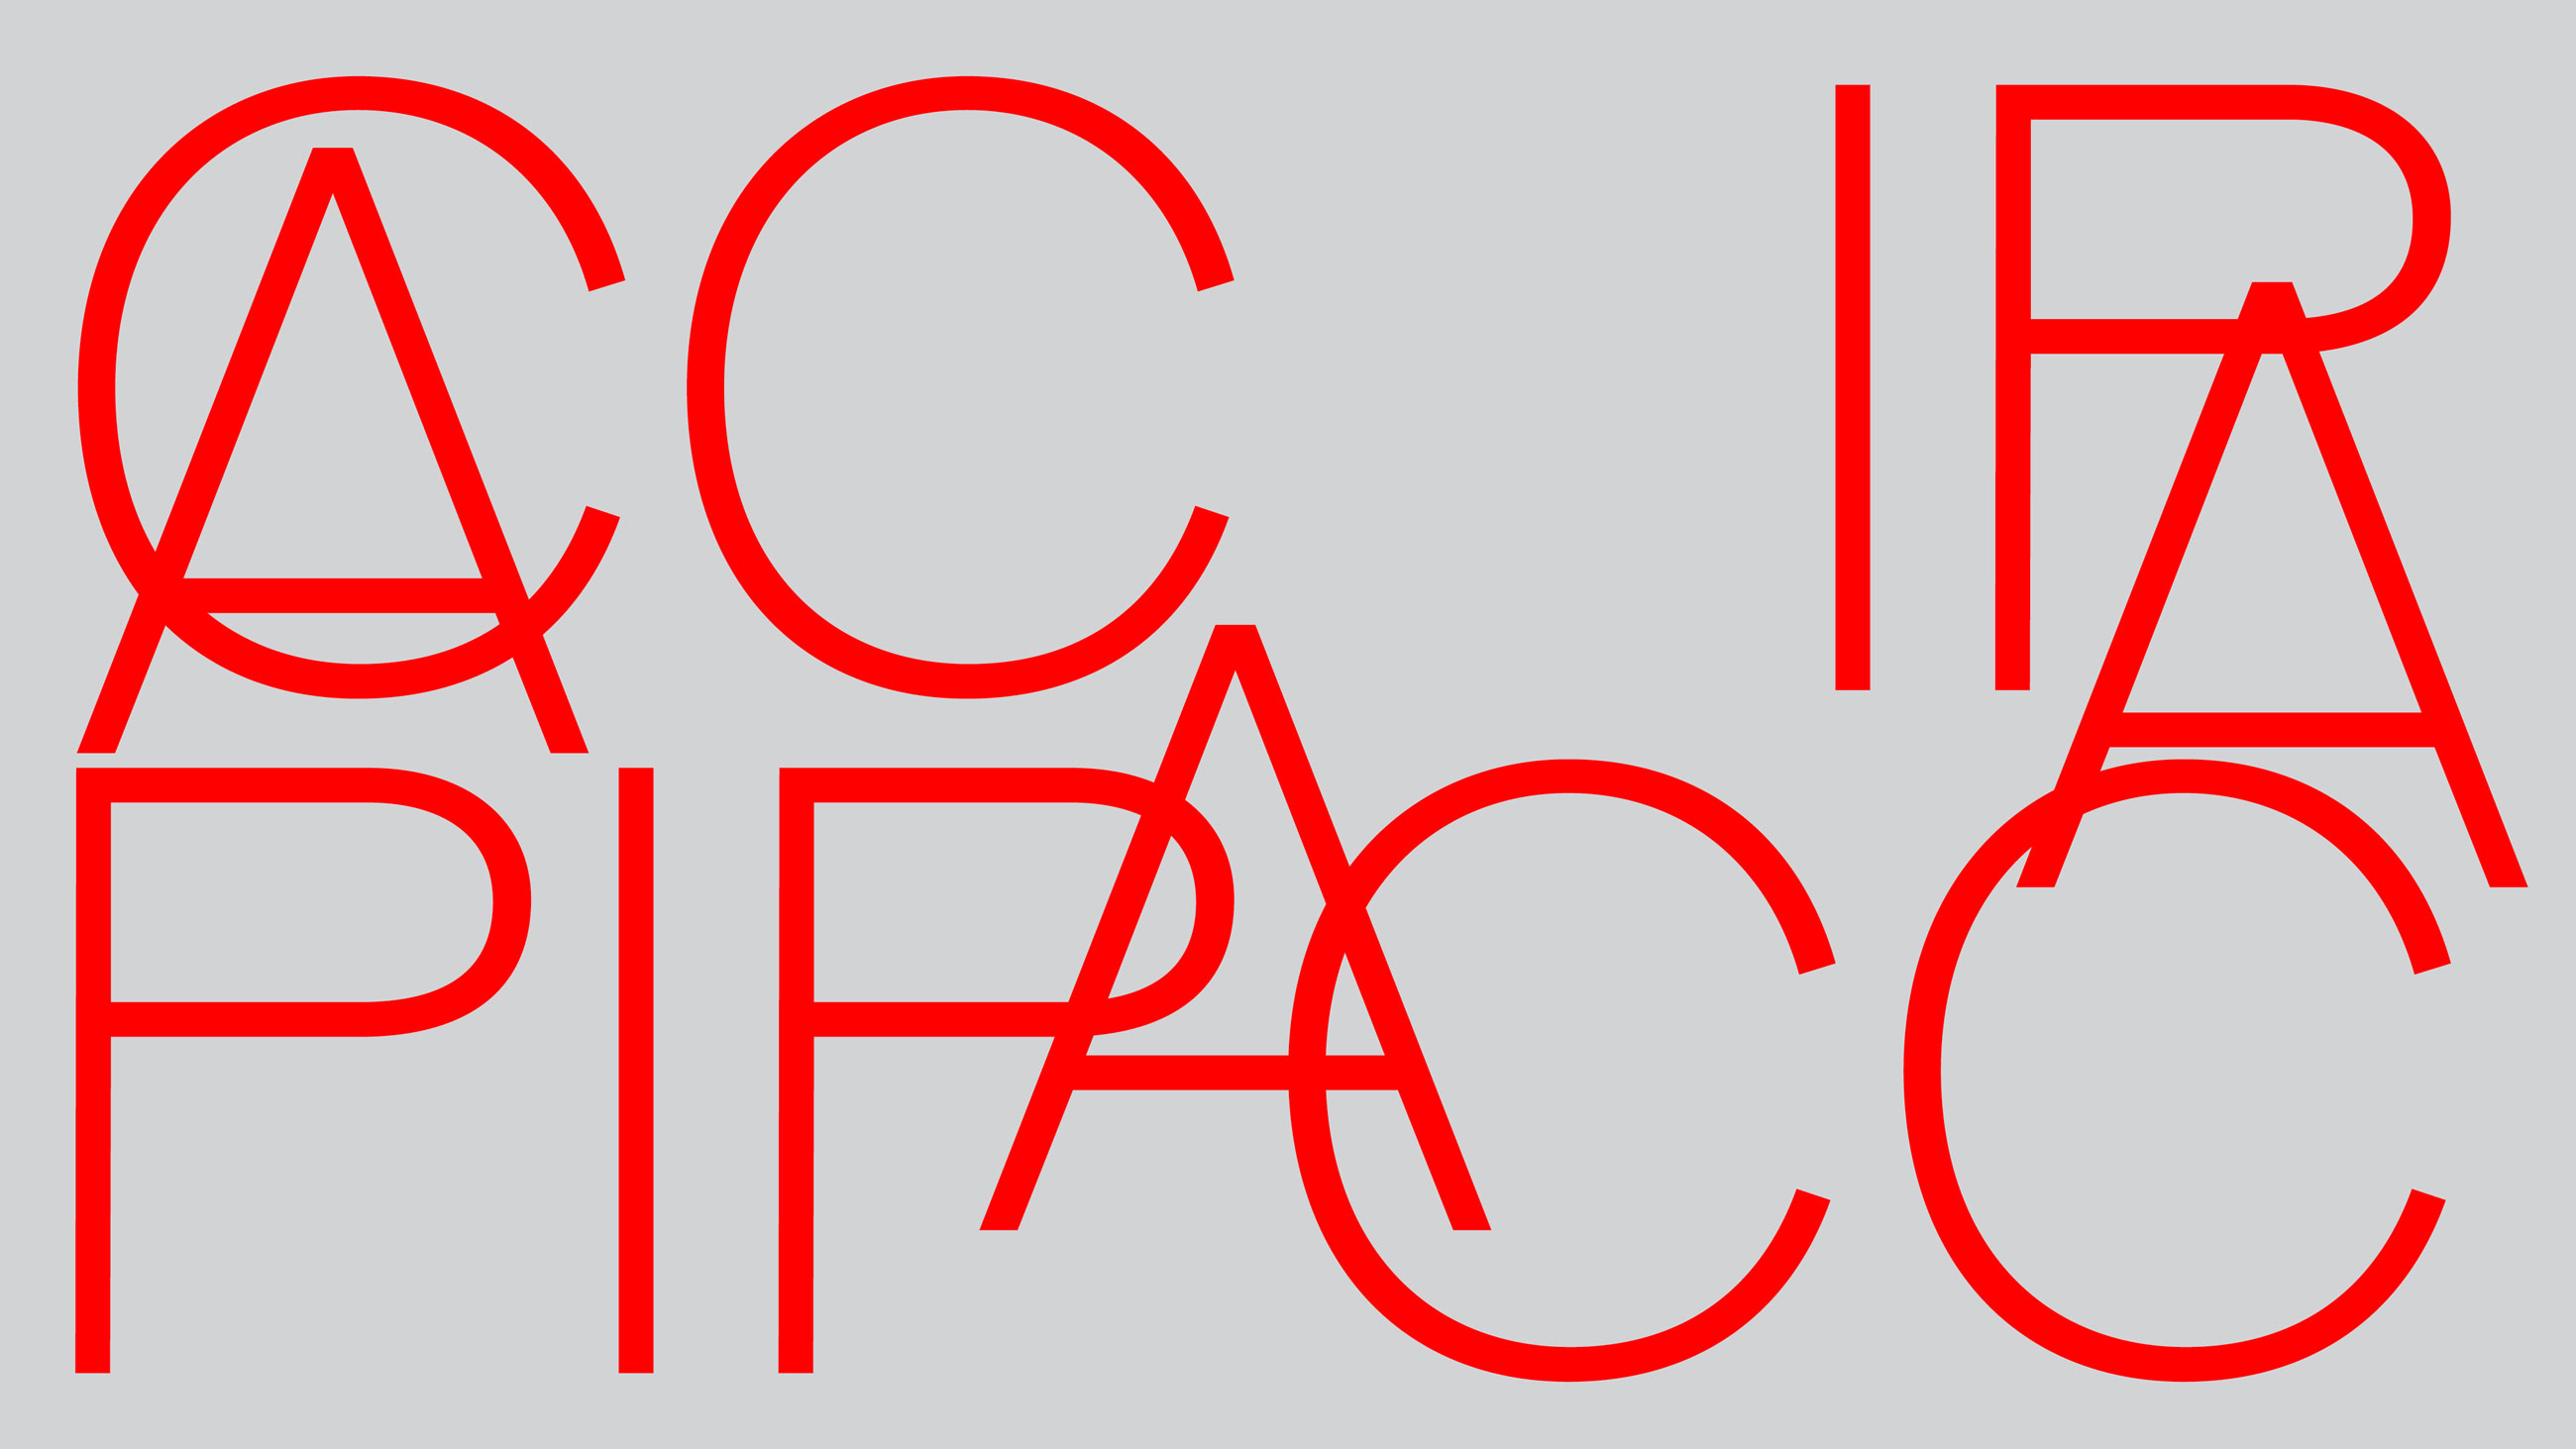 Logo of the IPACC- Intergovernmental Panel on Art and Climate Change. Design by Rudy Guedj.